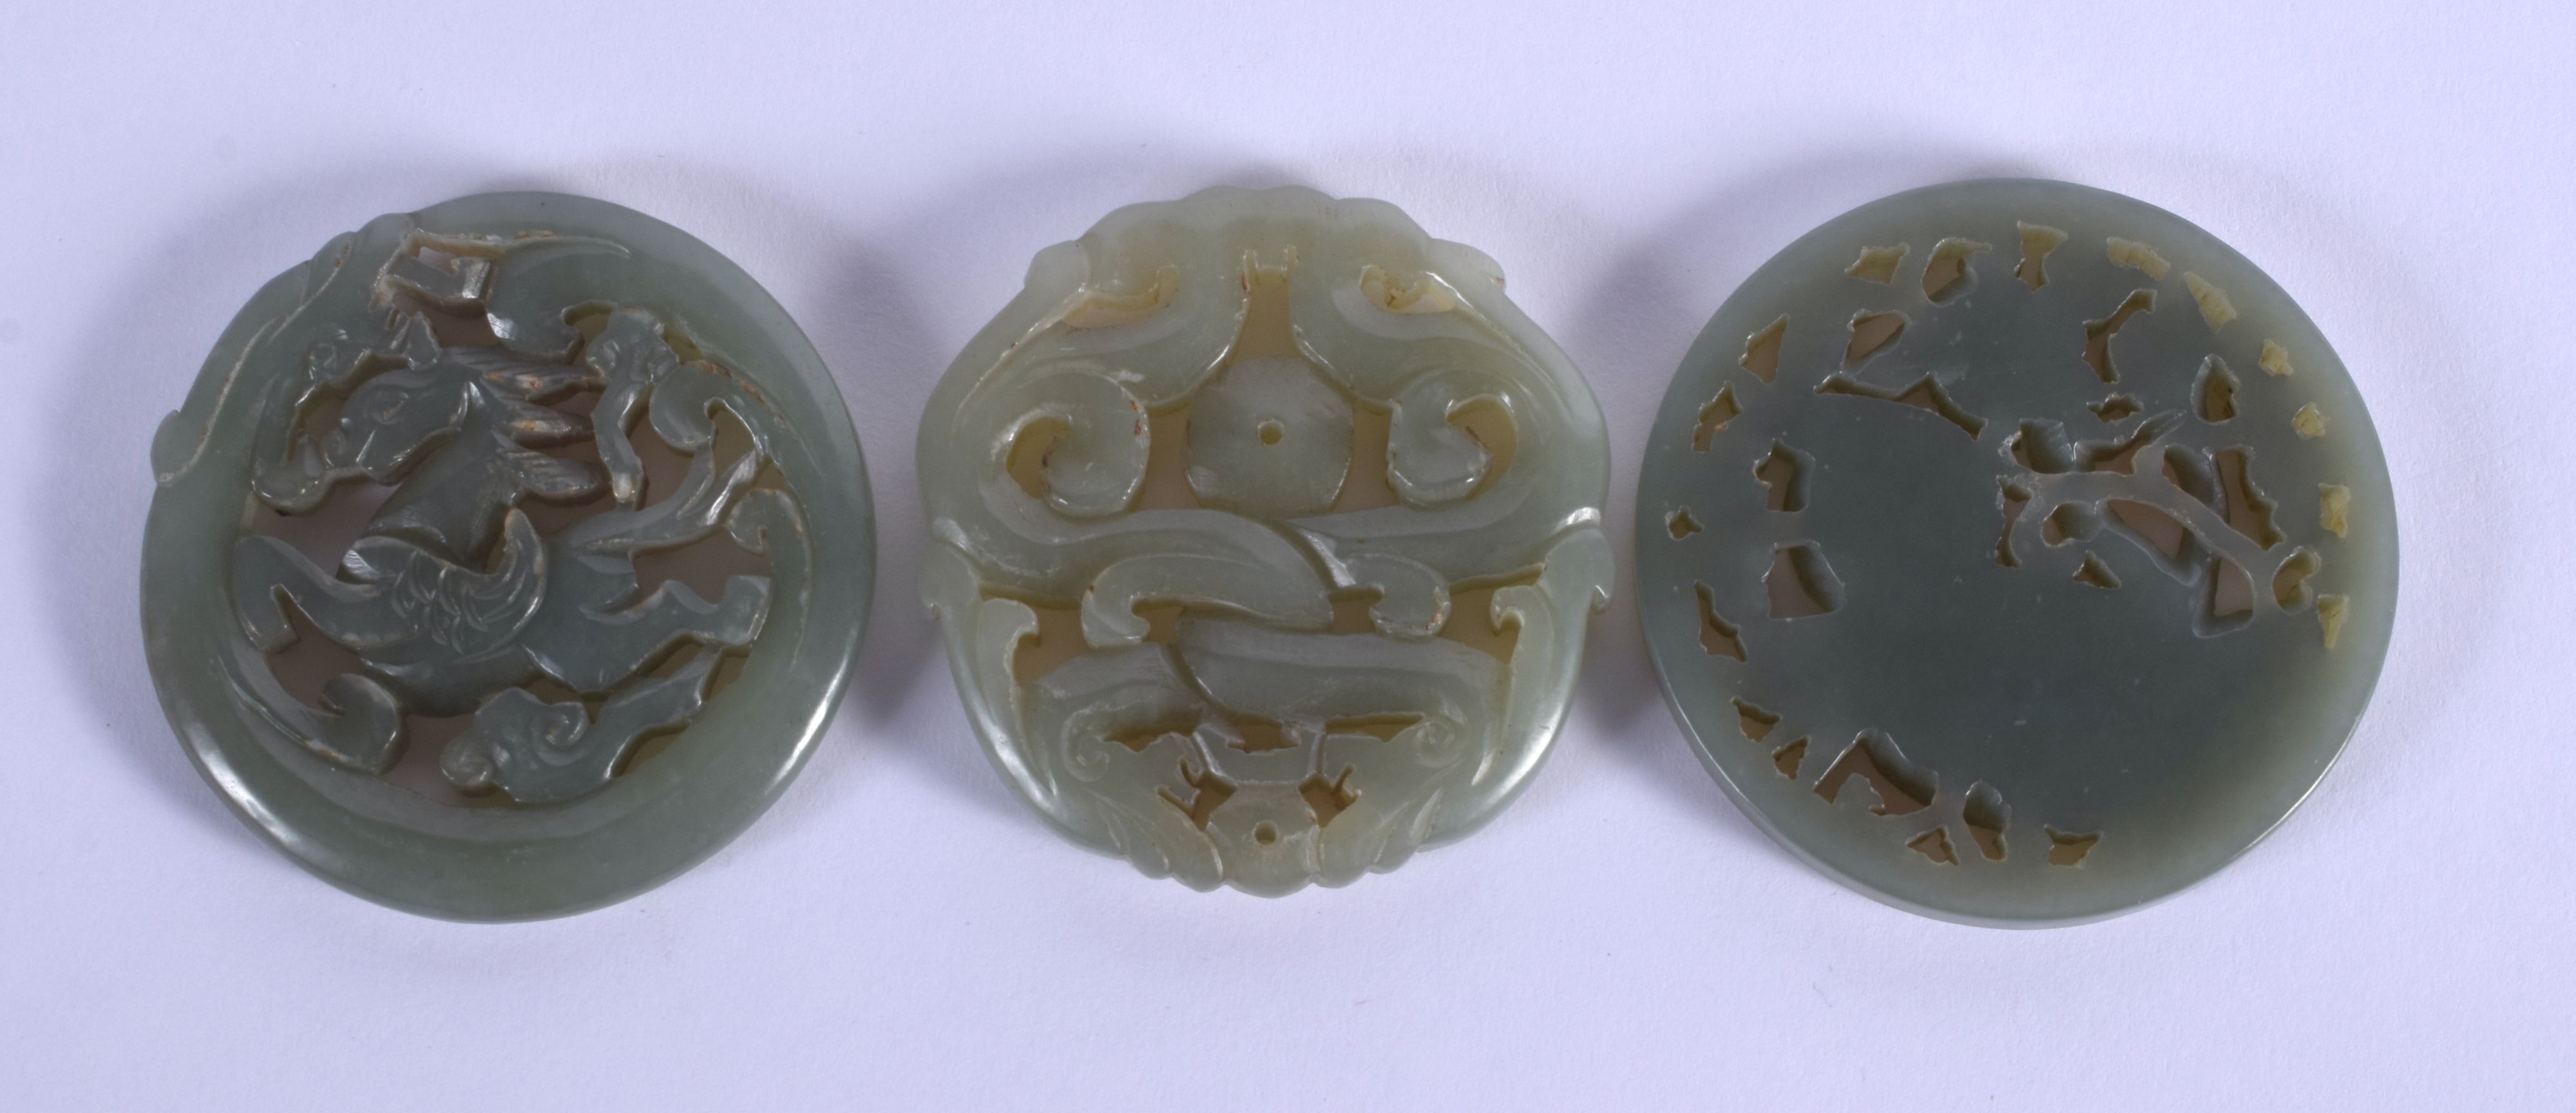 THREE CHINESE CARVED JADE PLAQUE PENDANTS 20th Century, in various forms and sizes. Largest 5 cm x 5 - Bild 2 aus 2